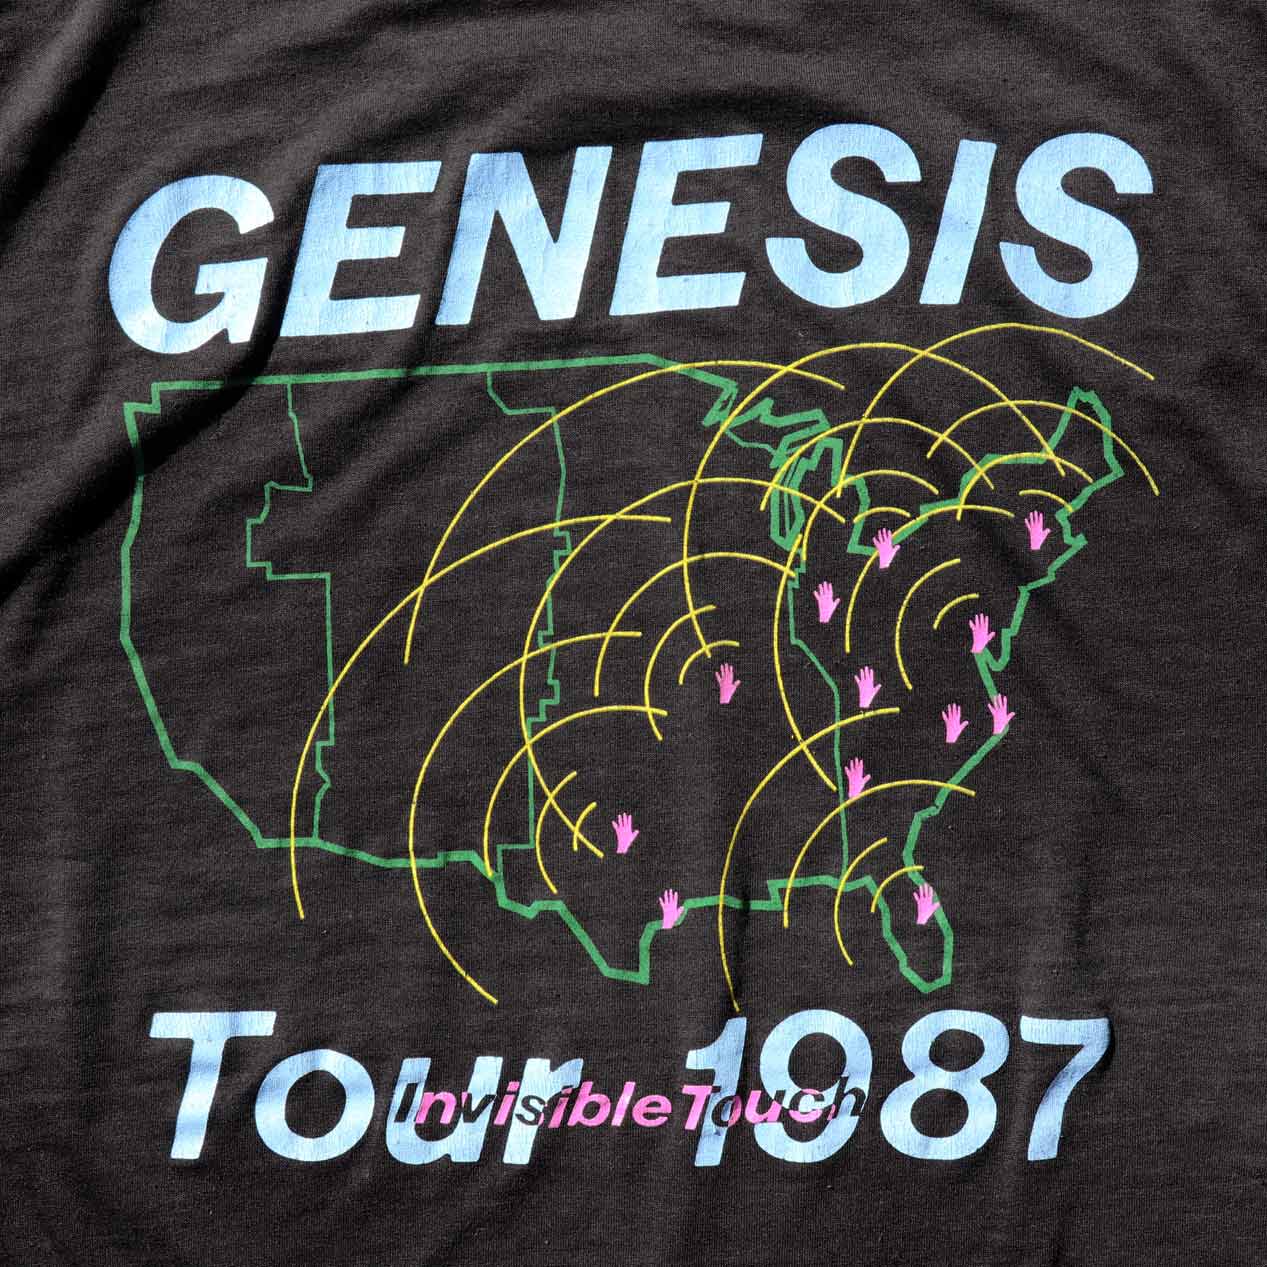 POST JUNK / 80's GENESIS ”INVISIBLE TOUCH TOUR 1987” プリントT